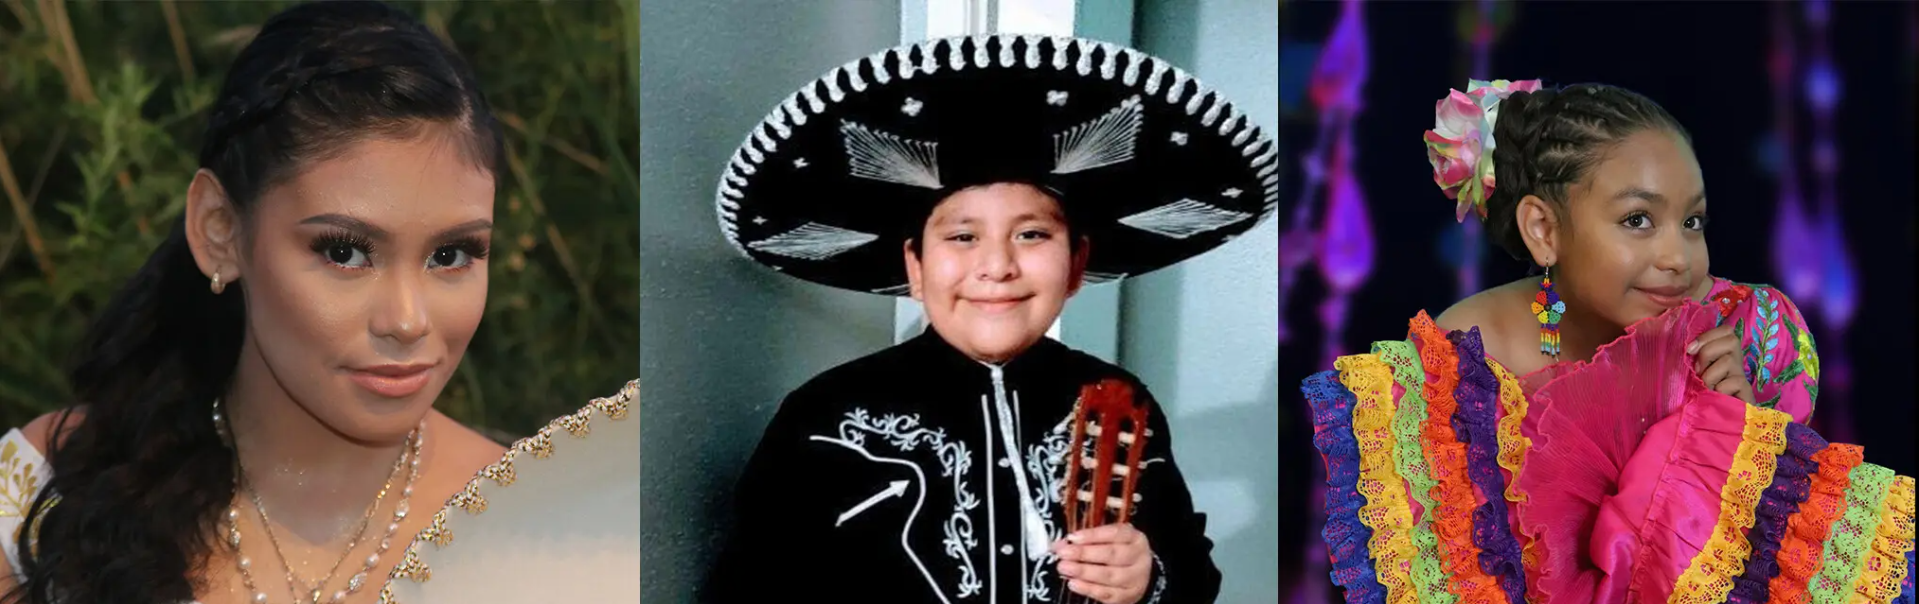 Mariachi Festival Presents Winners Of The 2022 National Mariachi Youth Vocalist Competition